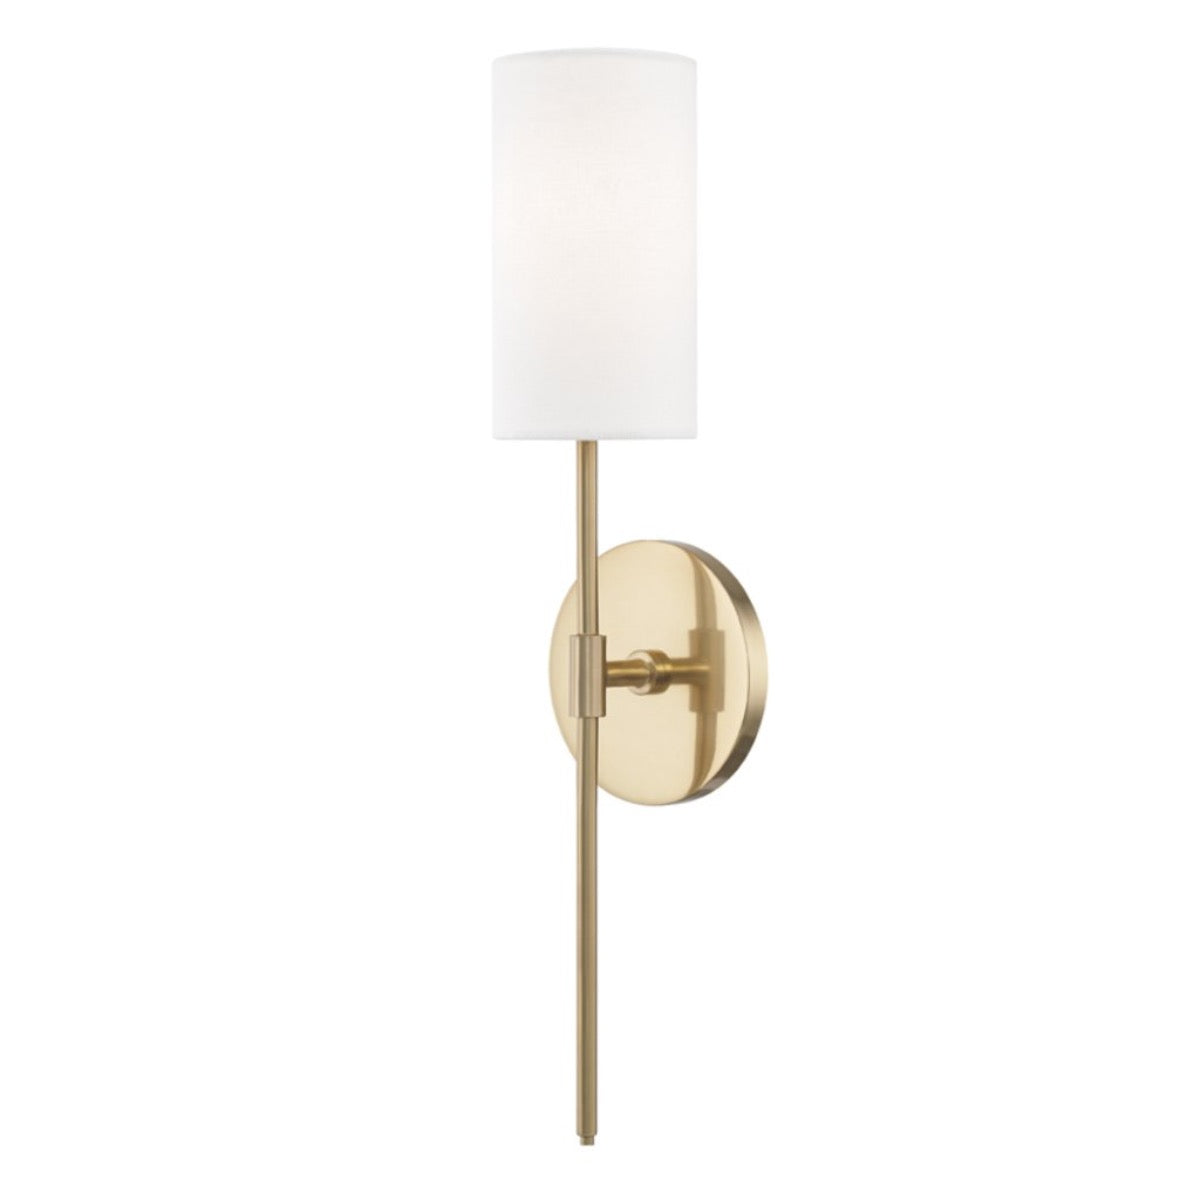 Killim Sconce Aged Brass. Left angle view.